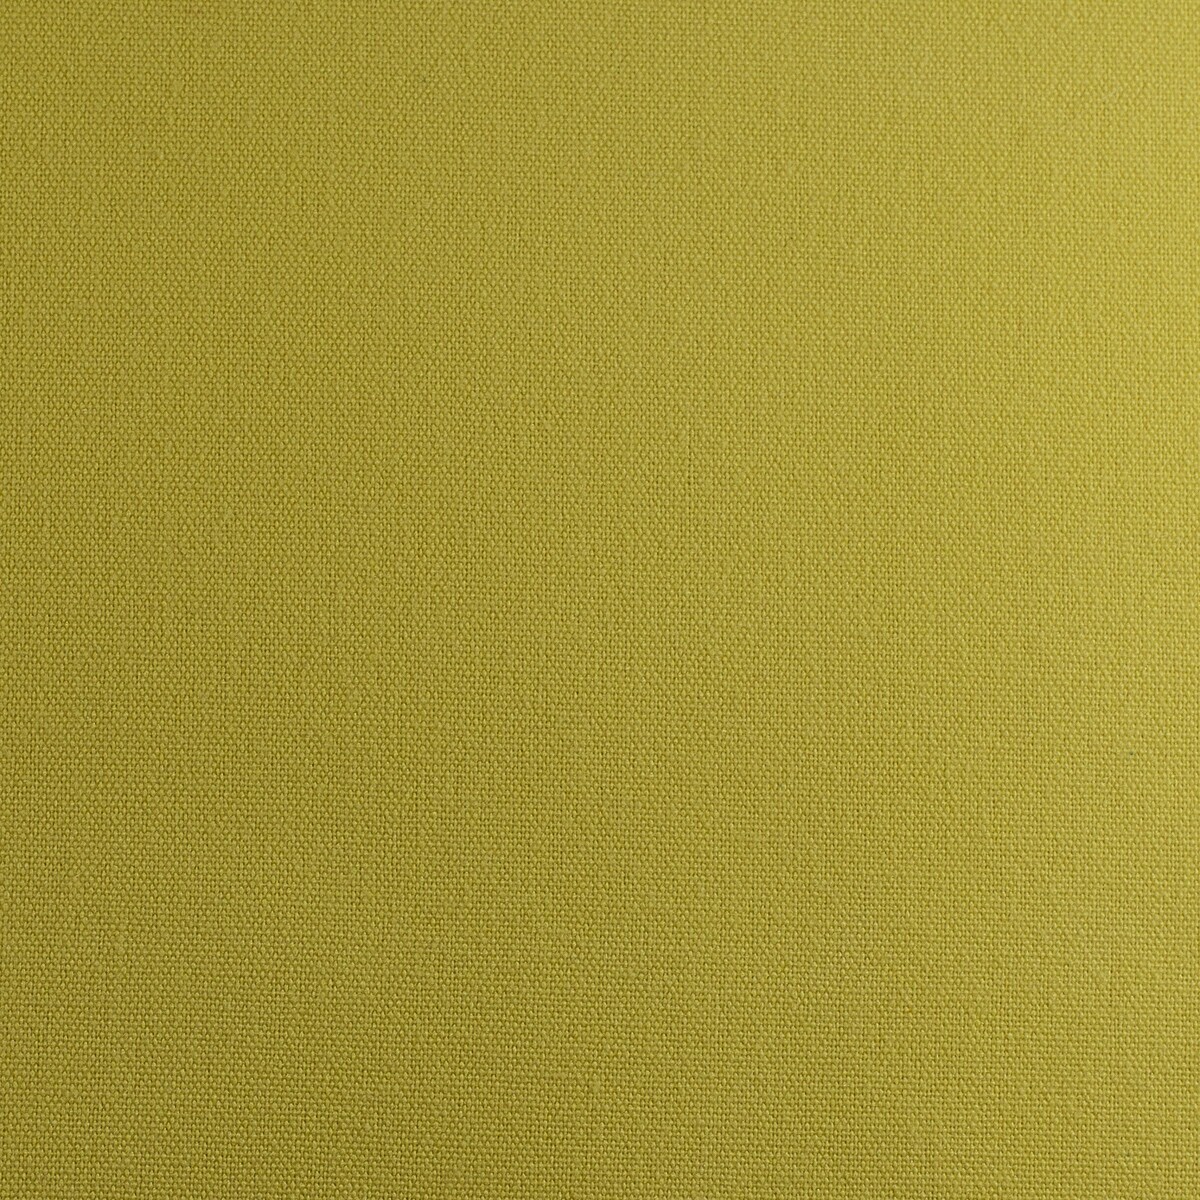 Yellow Solid